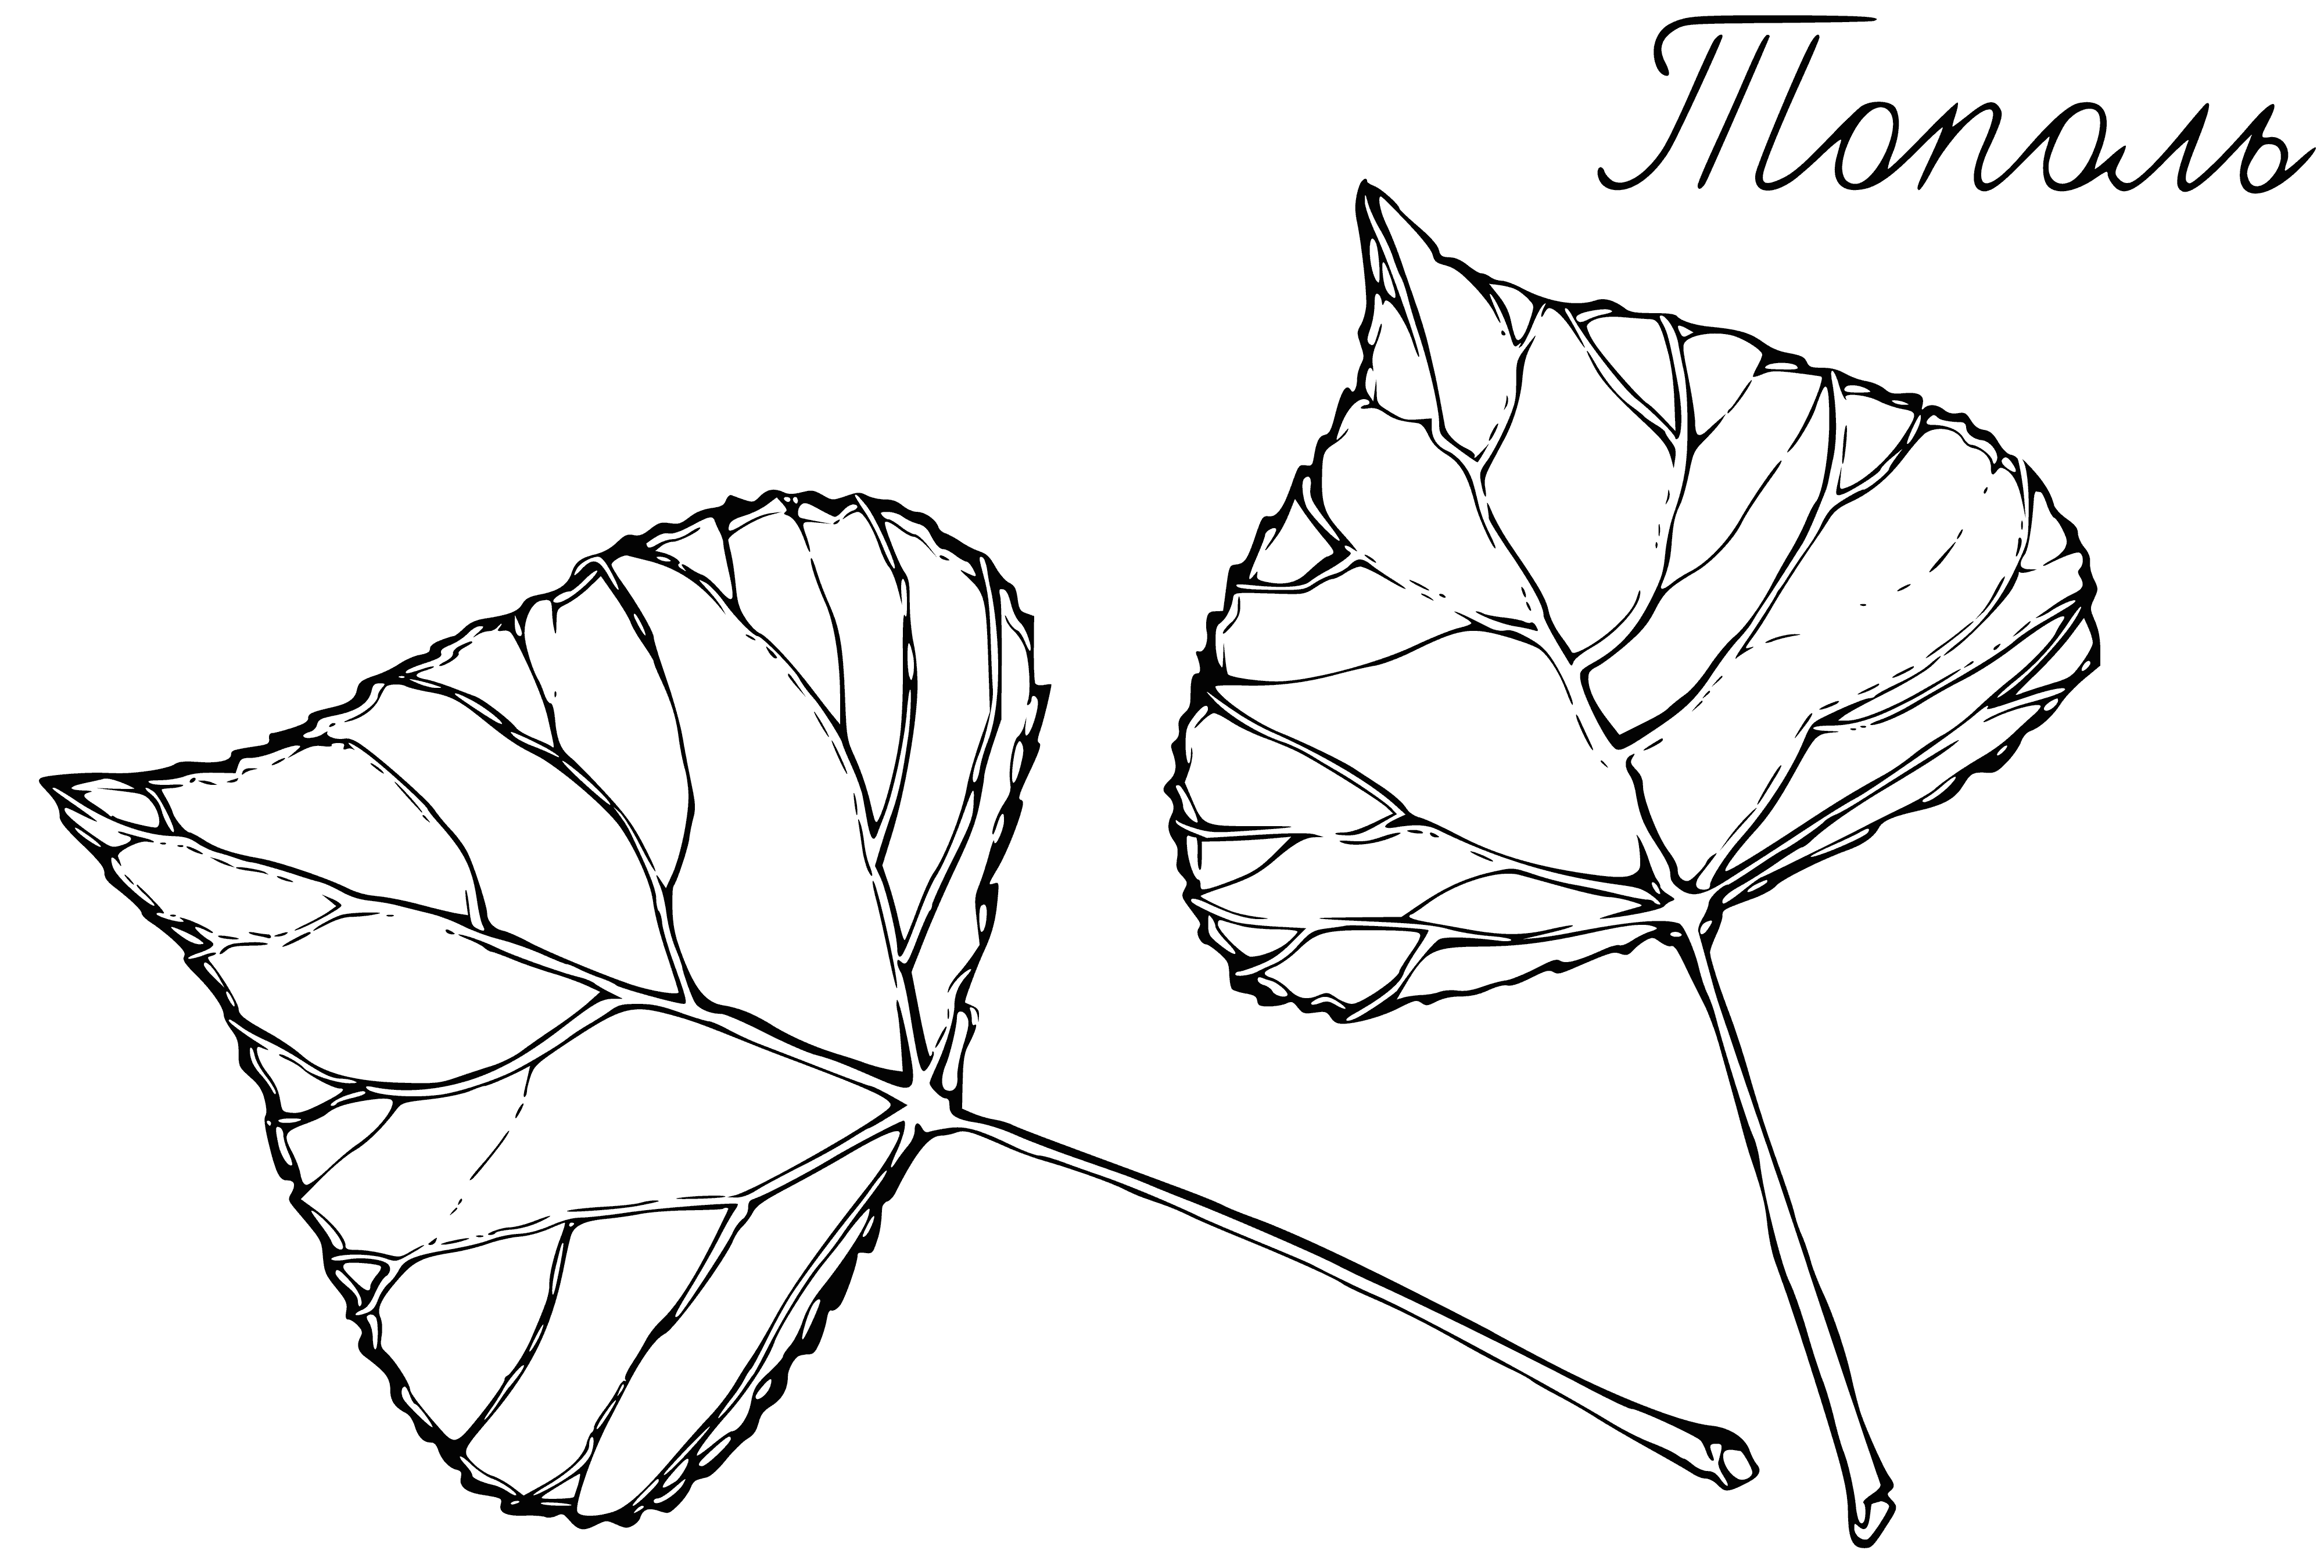 Poplar leaves coloring page